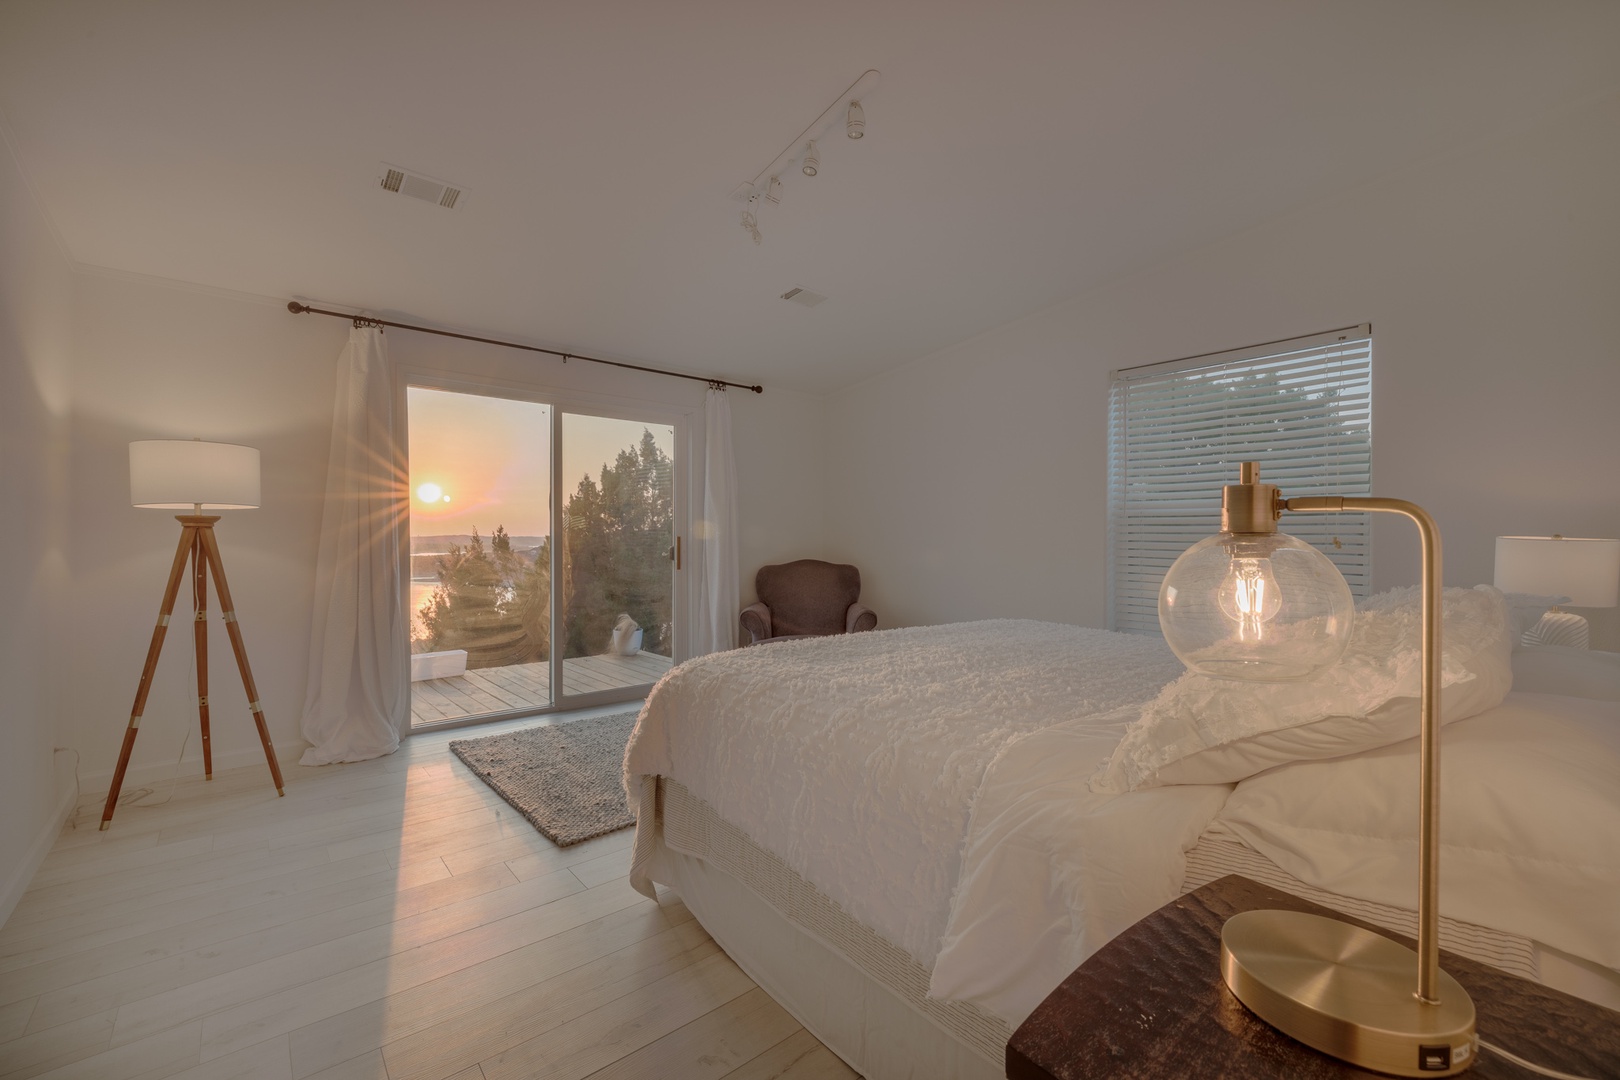 The second primary bedroom with a king-size bed also overlooks the lake with amazing views